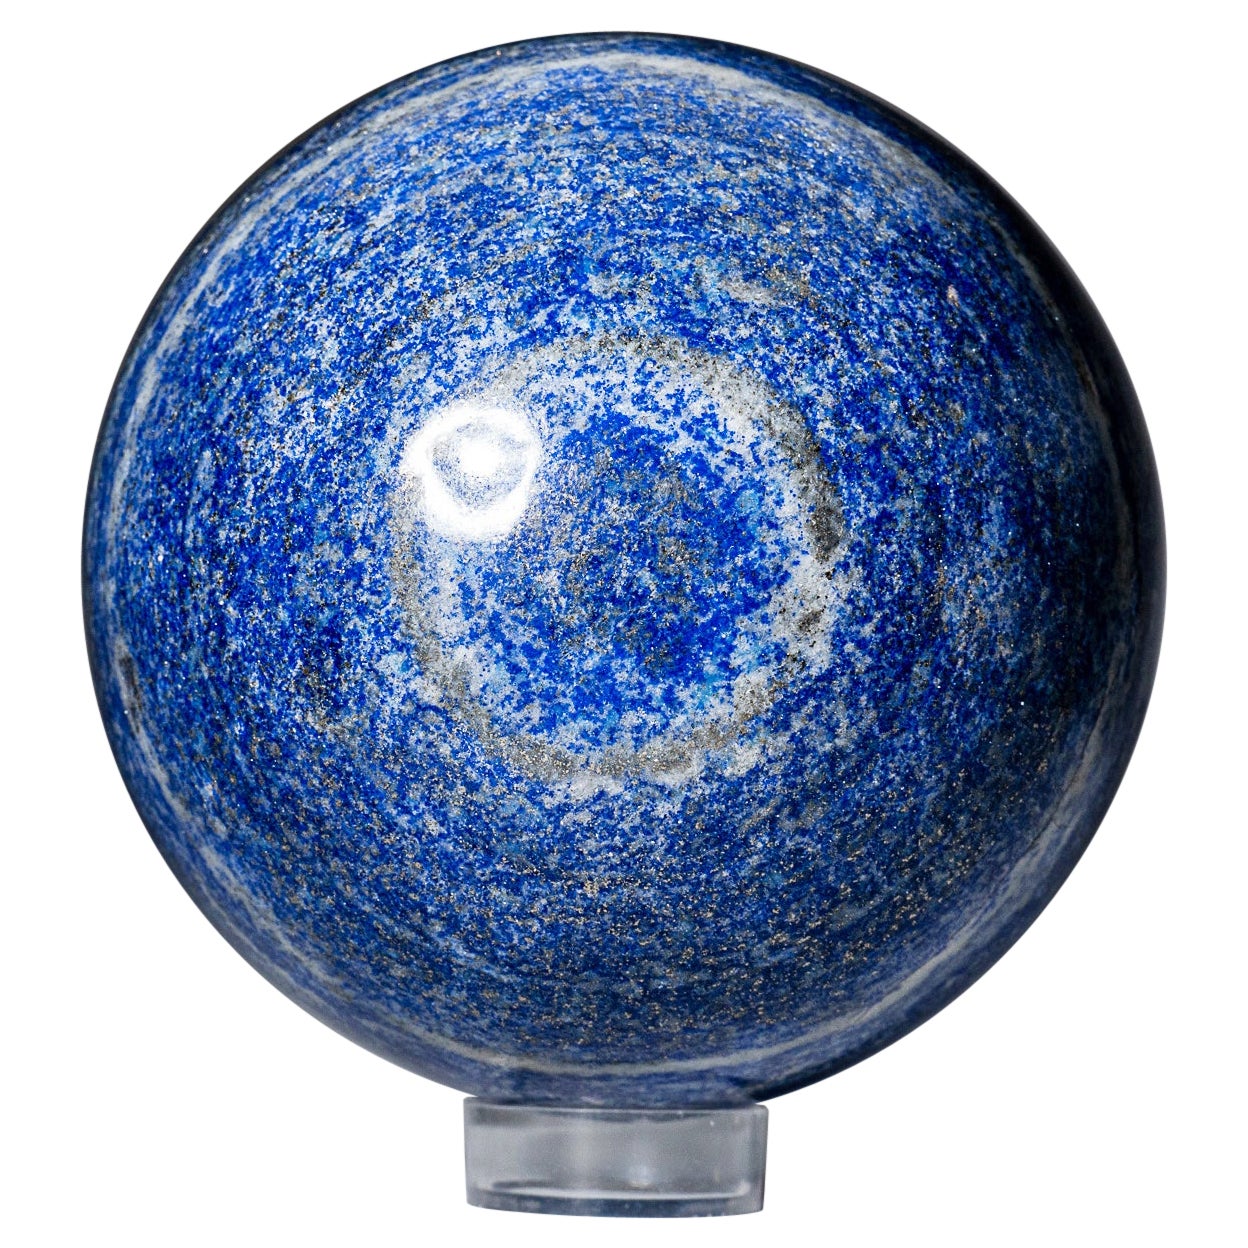 Polished Lapis Lazuli Sphere from Afghanistan (4", 5.2 lbs)